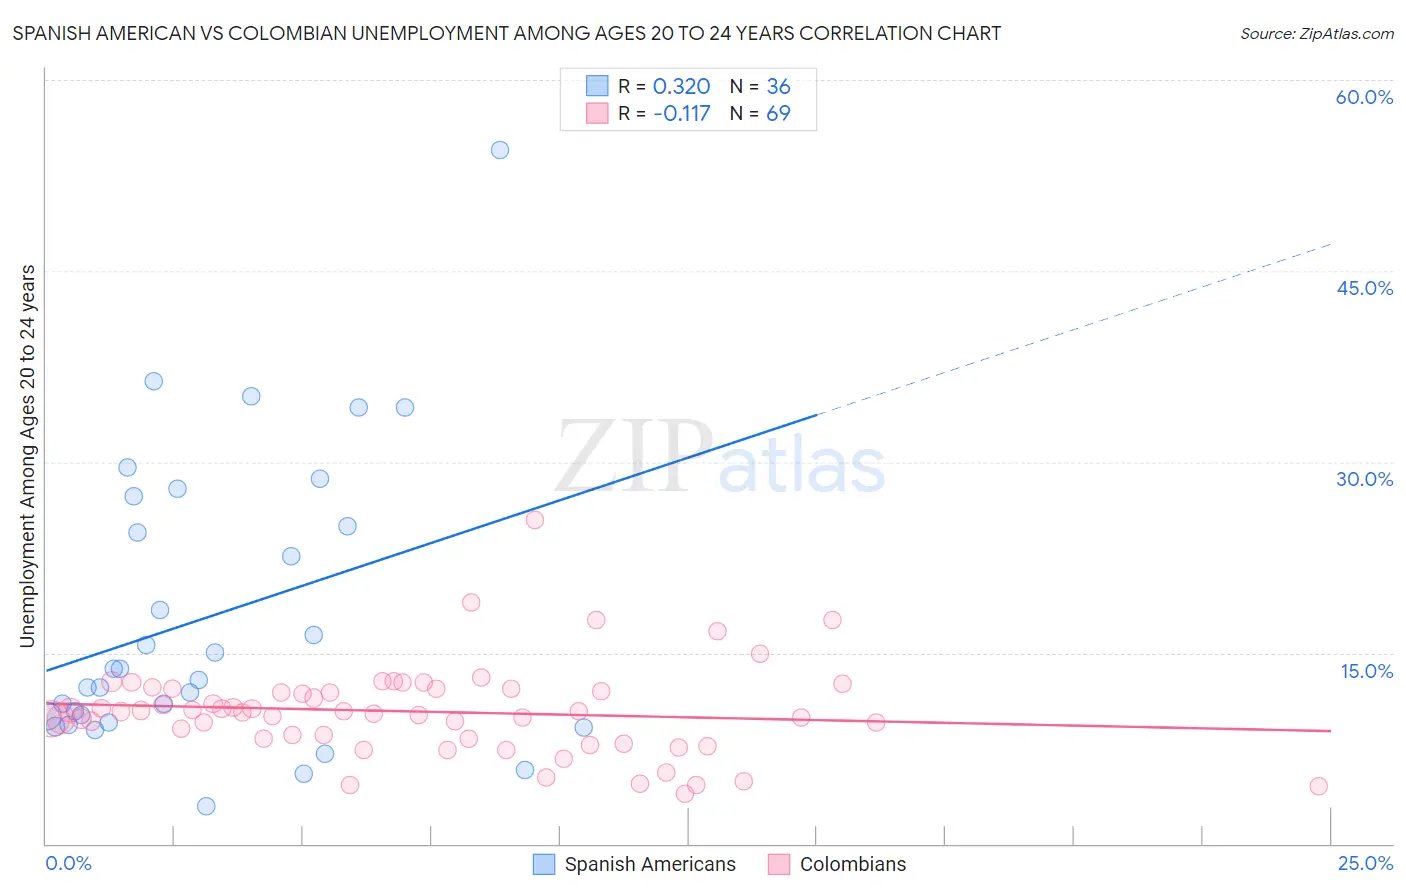 Spanish American vs Colombian Unemployment Among Ages 20 to 24 years